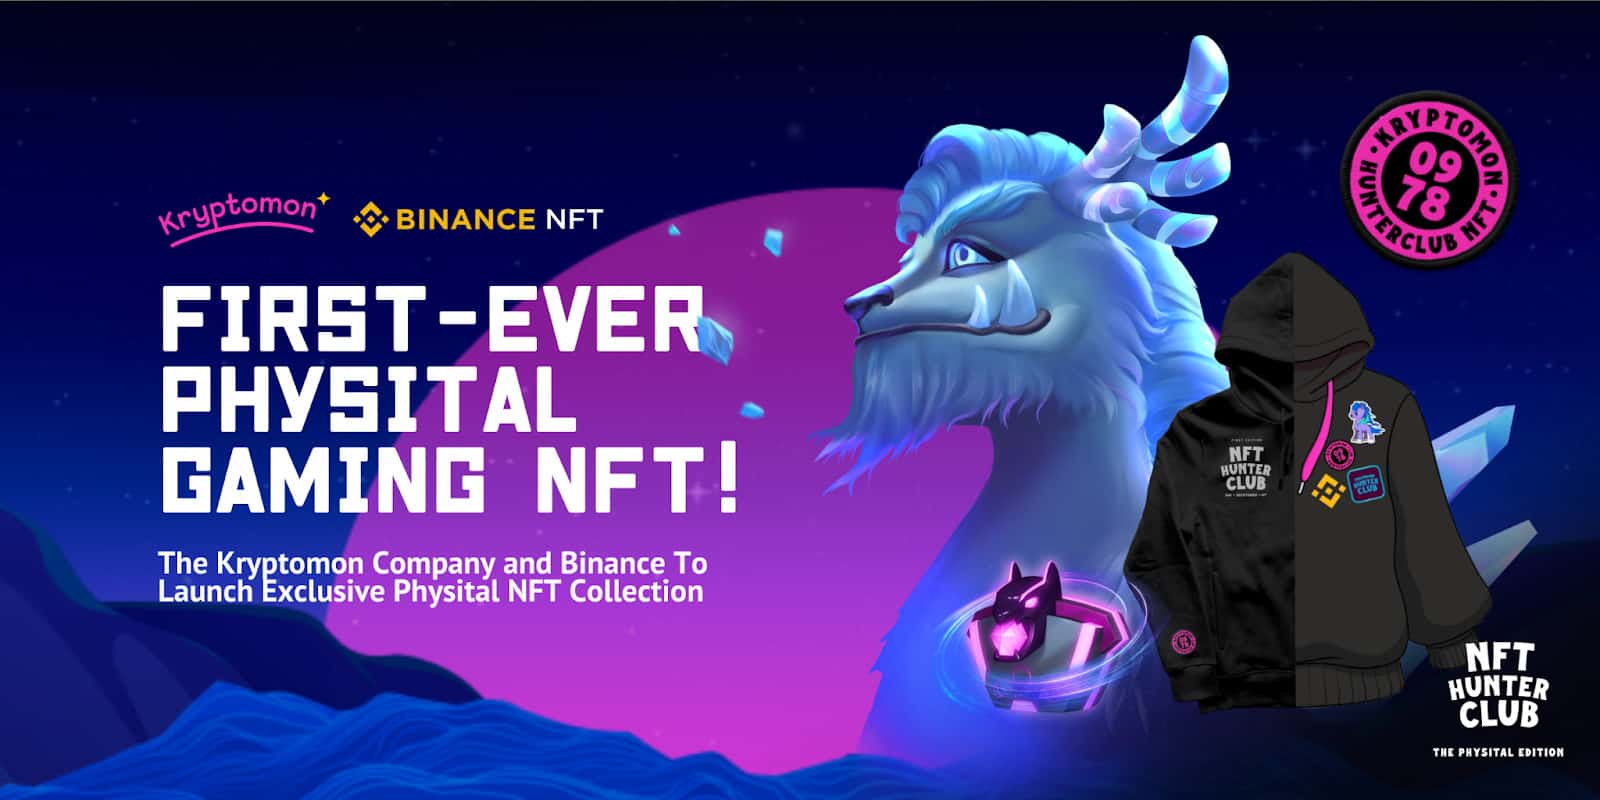 Non-Fungible Token (NFT) Collection - Kryptomon to Launch an Exclusive Physital NFT Collection on Binance NFT